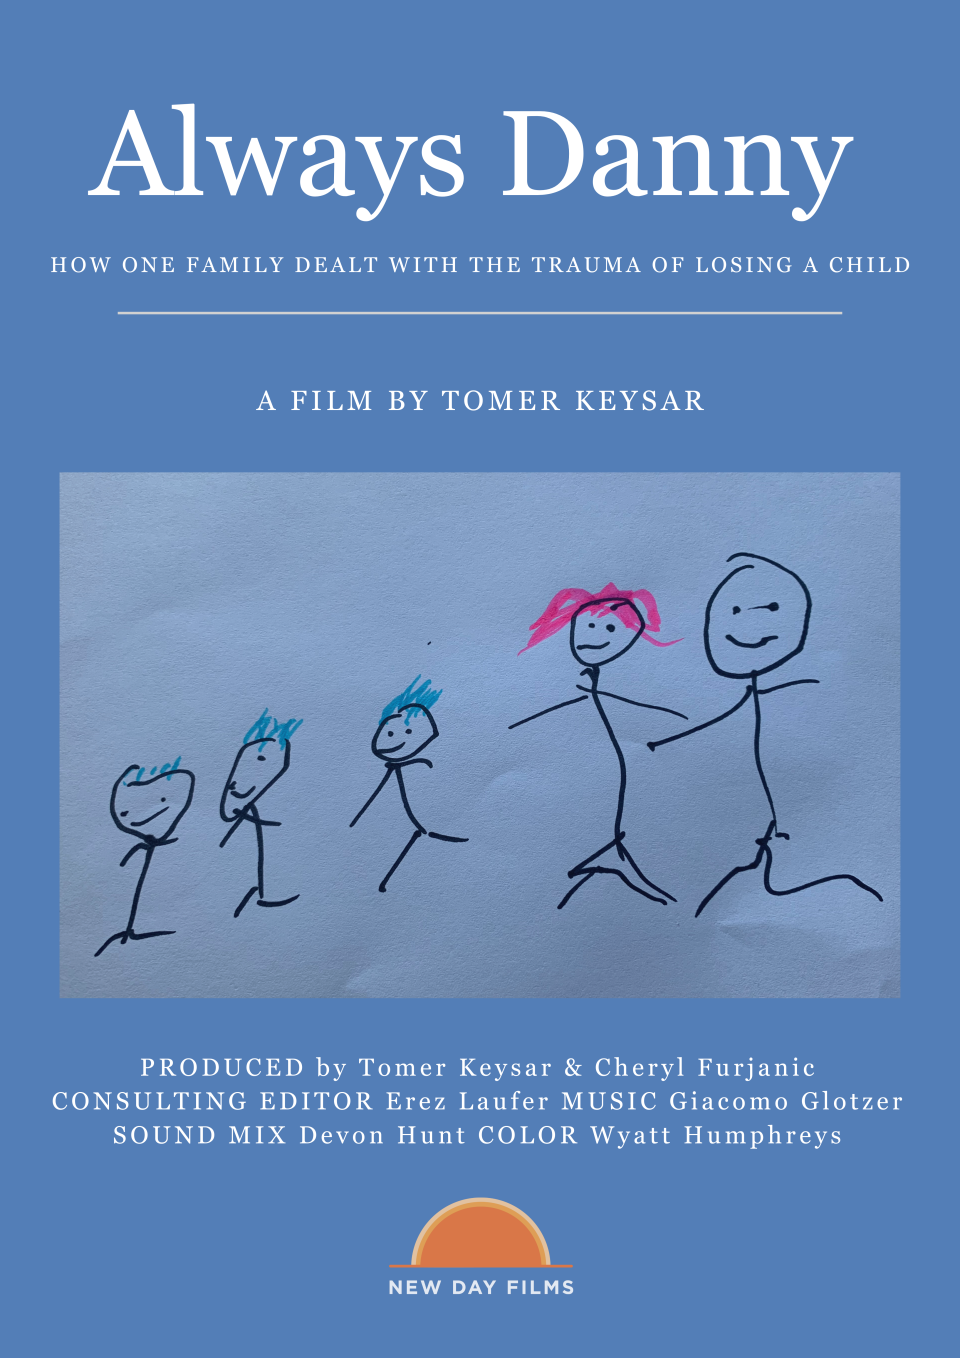 The poster has a rich blue background with the title "Always Danny" in white font at the top of the page. Below the title is the tagline "How one family dealt with the trauma of losing a child." in white font. In the middle of the poster is a stick figure drawing of a family, three kids with blue hair, a mom with pink hair and a dad with no hair.